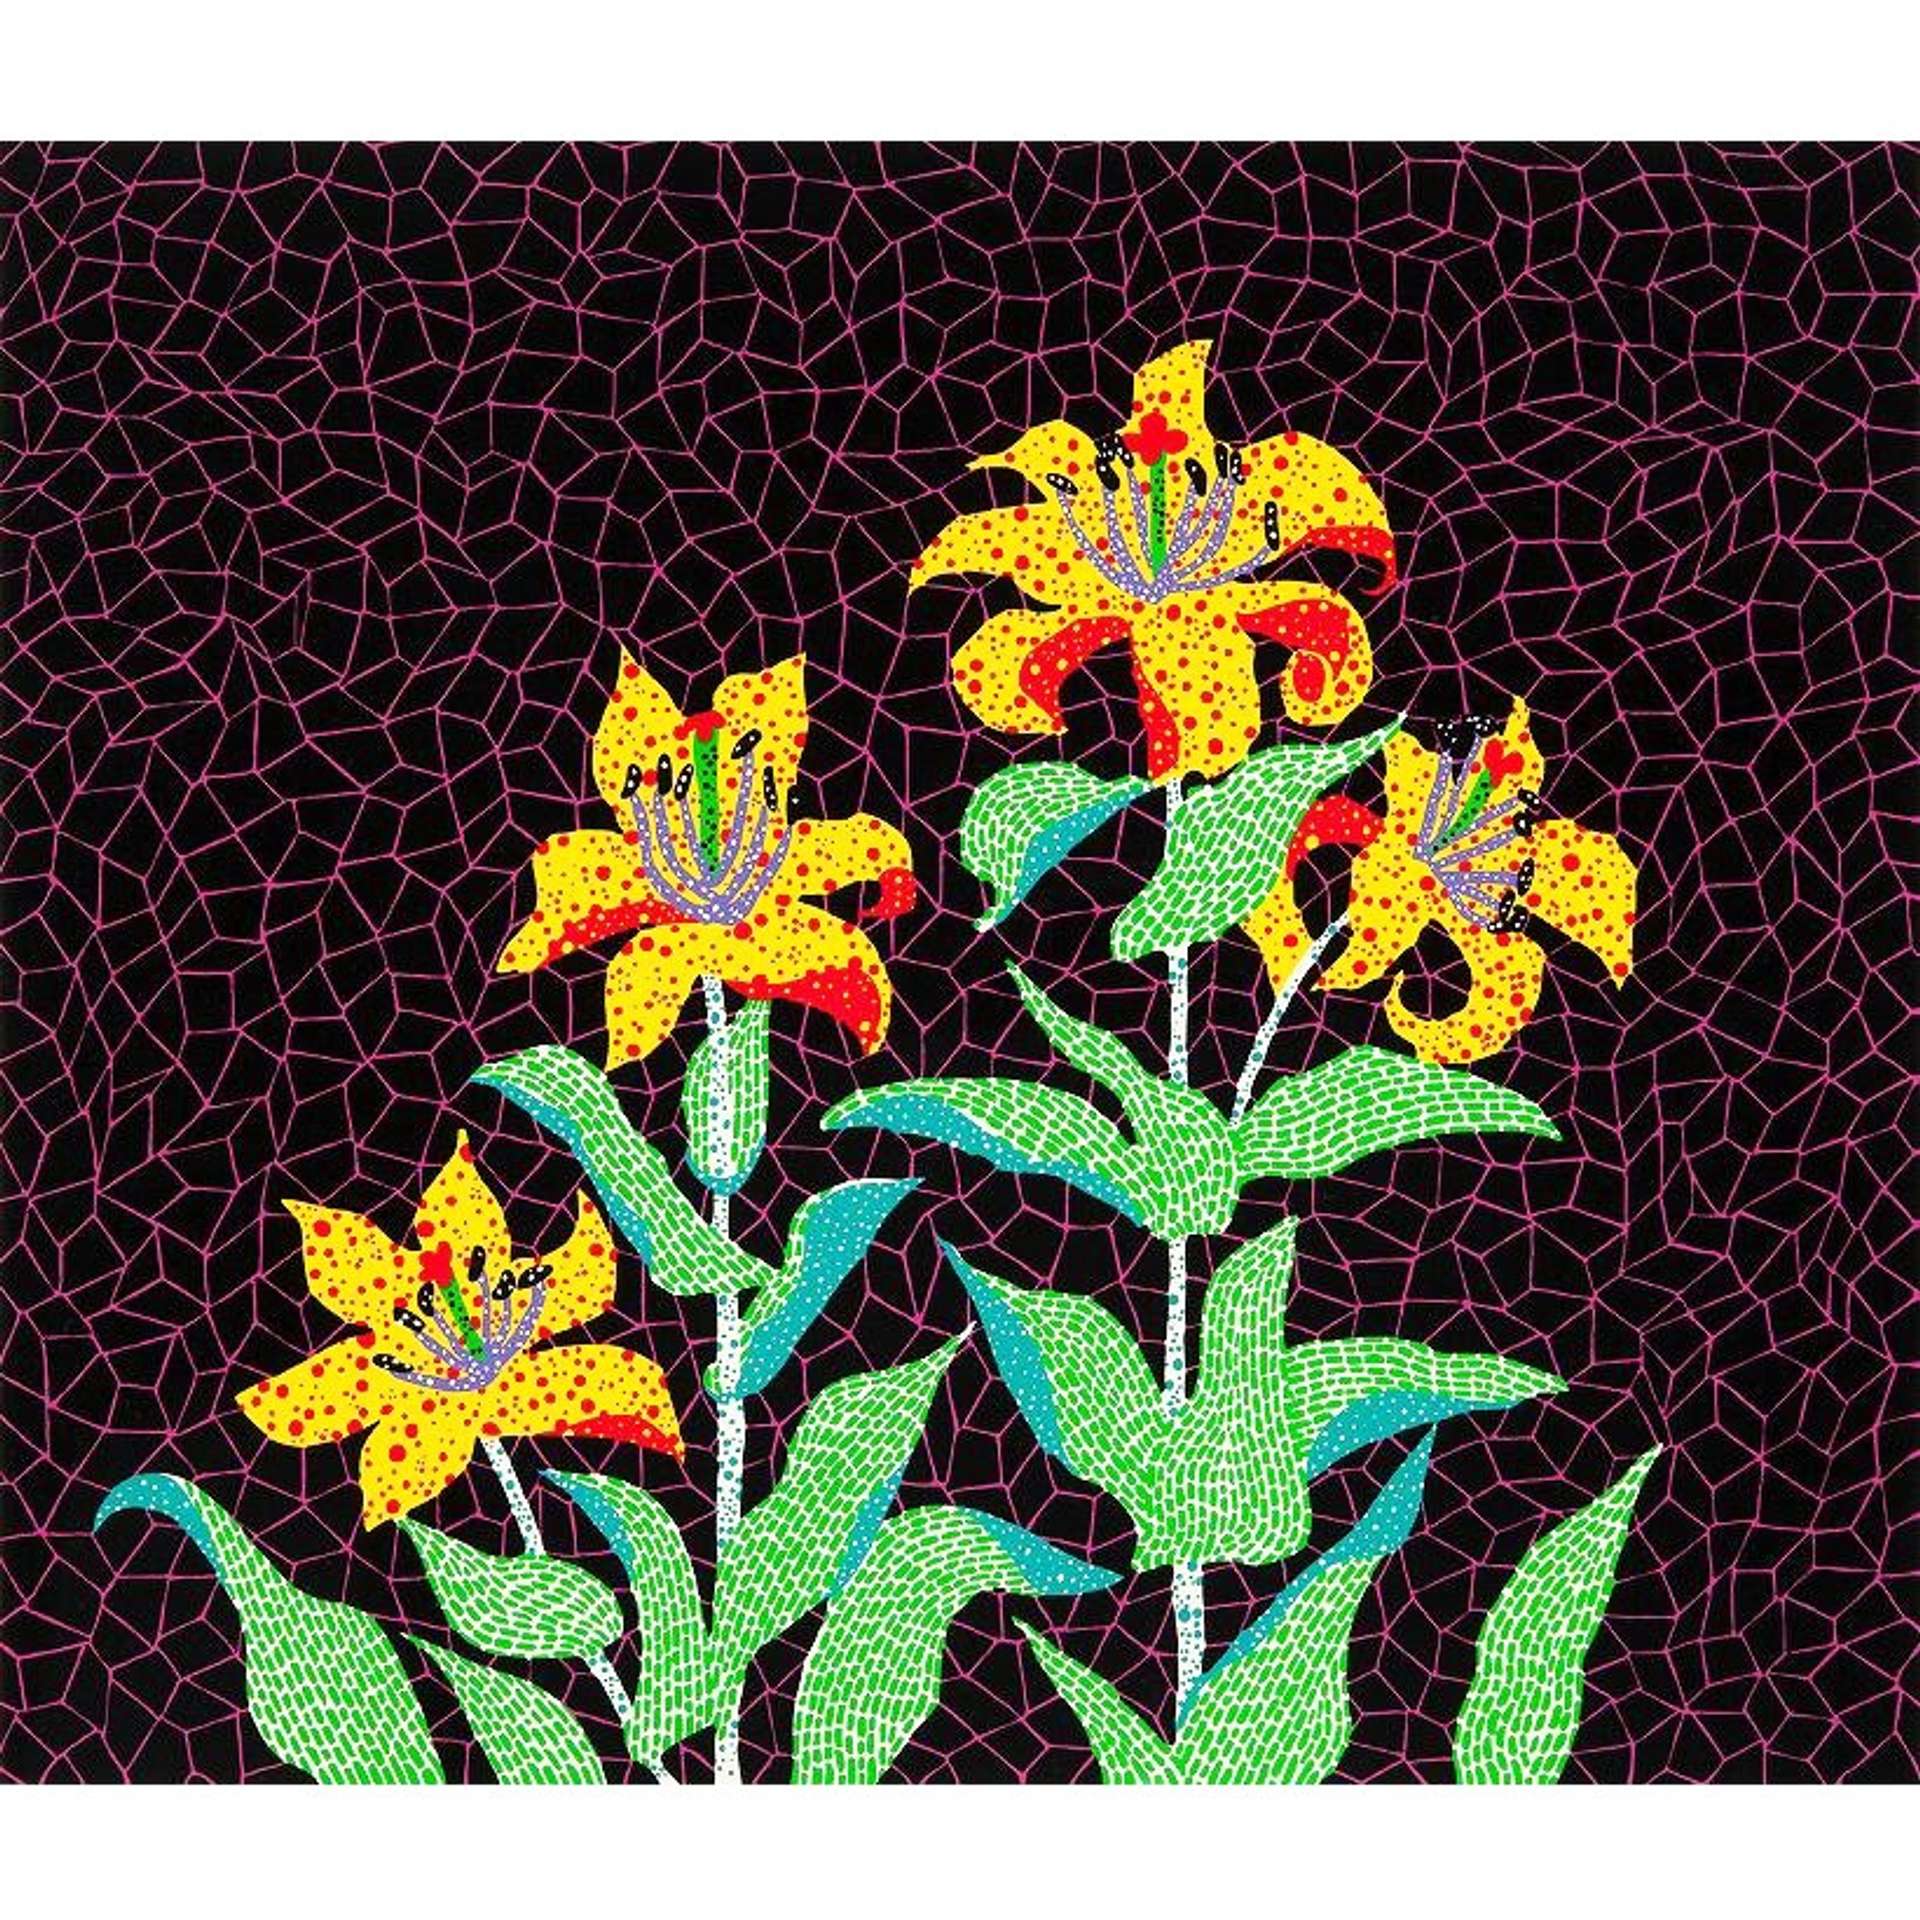 Yayoi Kusama’s Flowers, Kusama 83. A screenprint of four flowers made up of patterns of green, red, and yellow against a pink and black geometric background. 